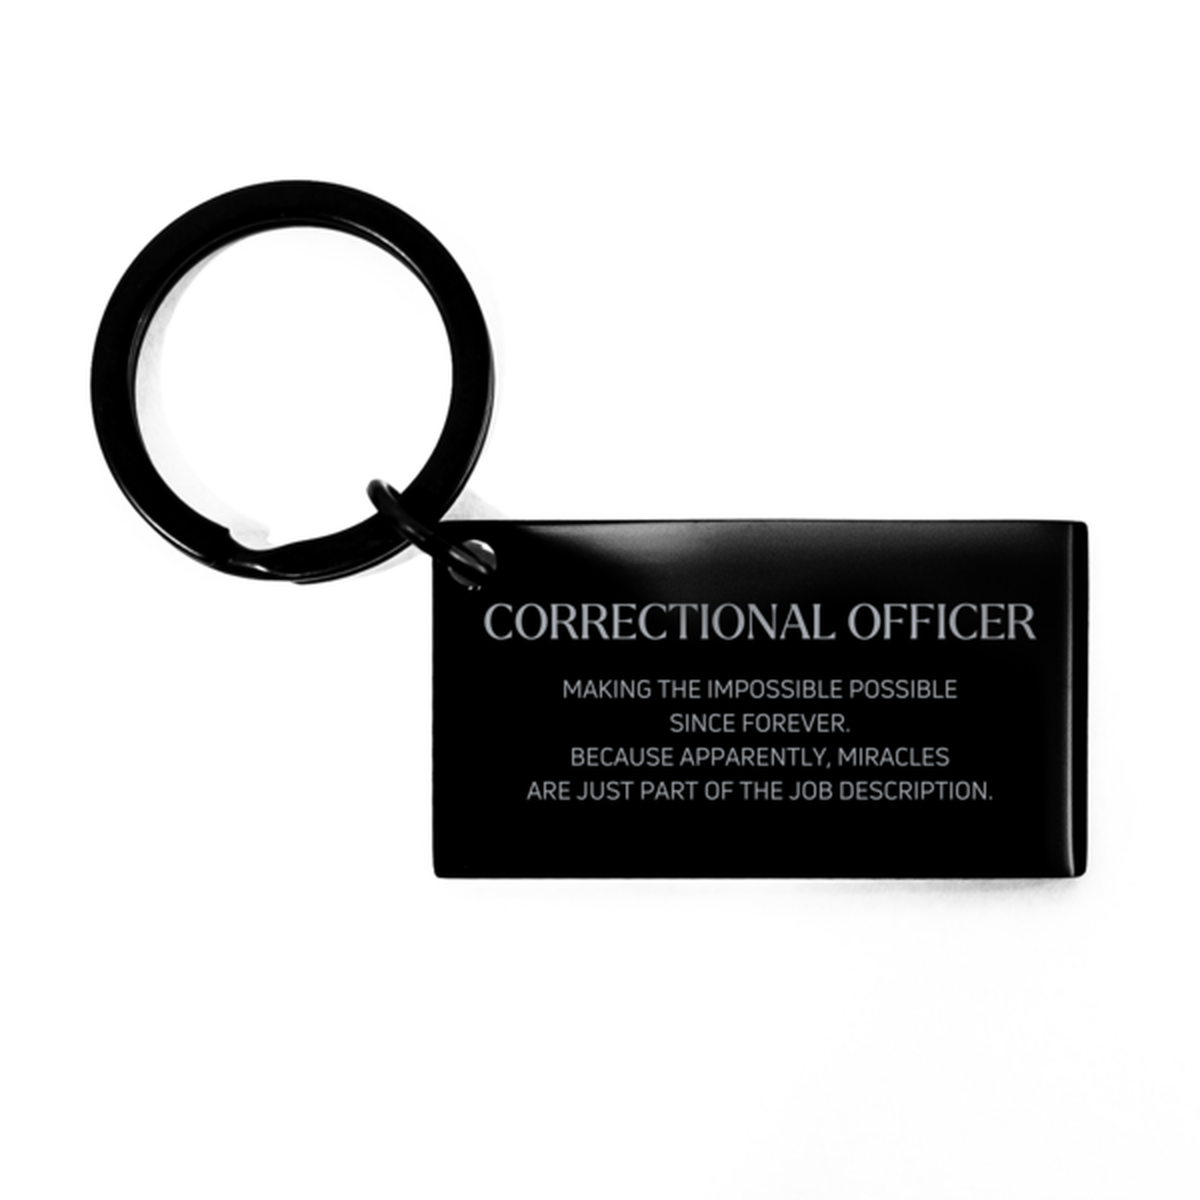 Funny Correctional Officer Gifts, Miracles are just part of the job description, Inspirational Birthday Keychain For Correctional Officer, Men, Women, Coworkers, Friends, Boss